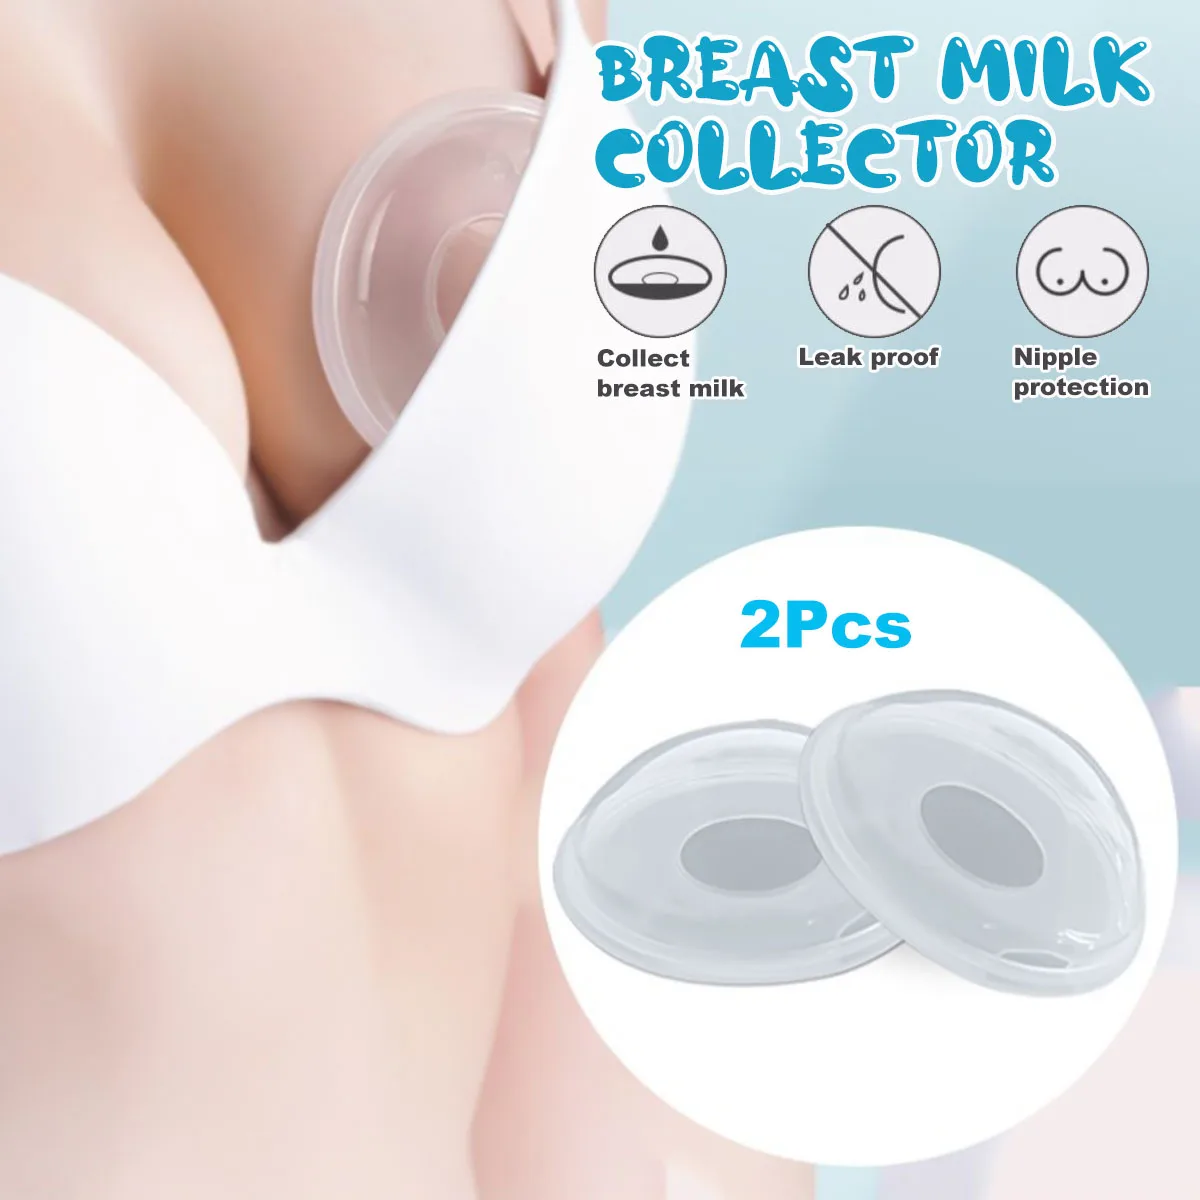 

1 Pair Silicone Breast Collector Shell Nursing Cup Milk Saver Protect Sore Nipples For Breastfeeding Baby Breastmilk Shell